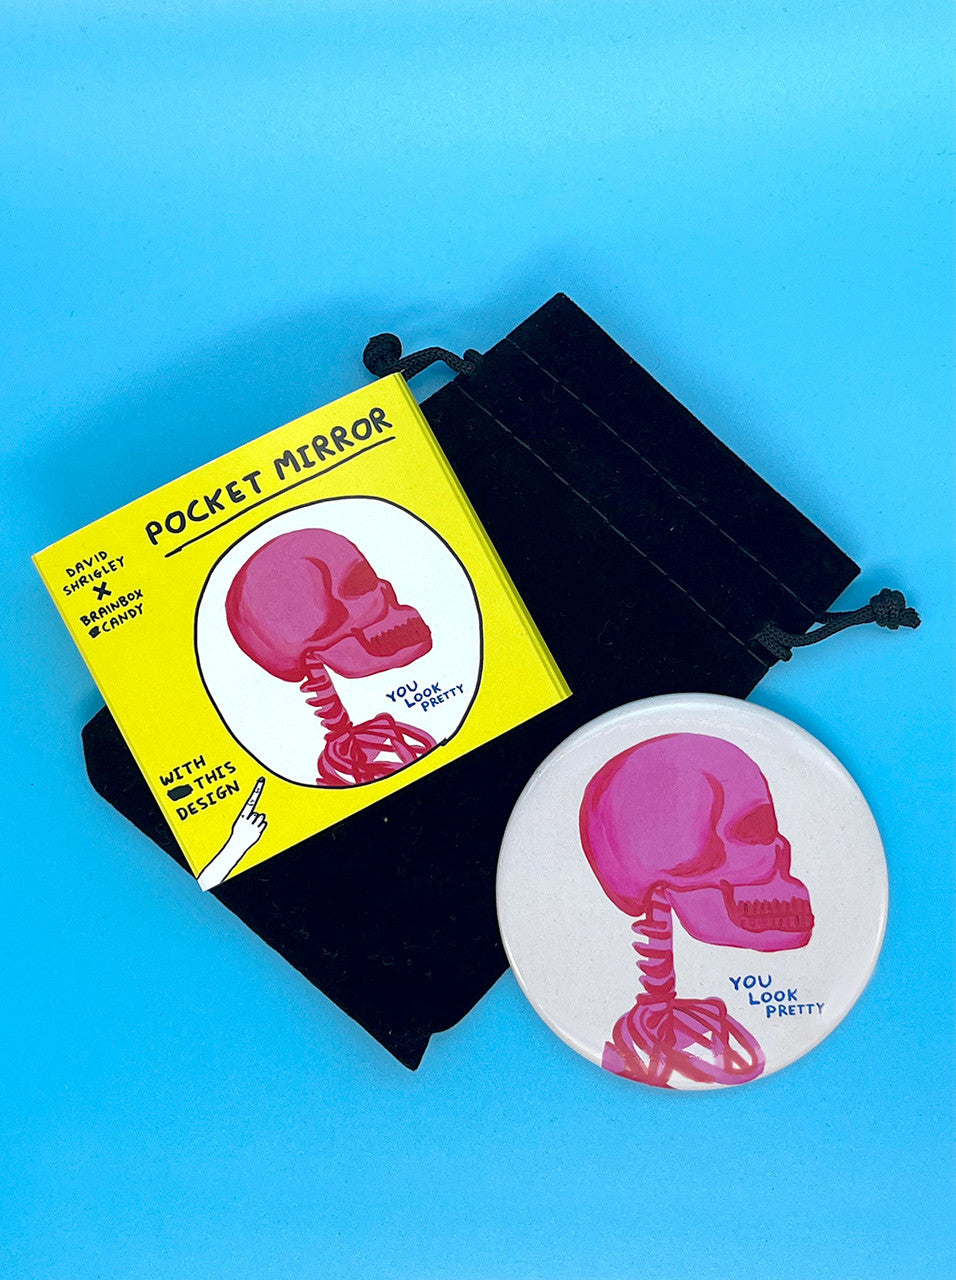 A white round pocket mirror with drawing of a pink skeleton from the shoulders and navy handwriting saying You Look Pretty by artist DAvid Shrigley. There is a black velvet drawstring pouch that is comes in and bright yellow packaging to match.